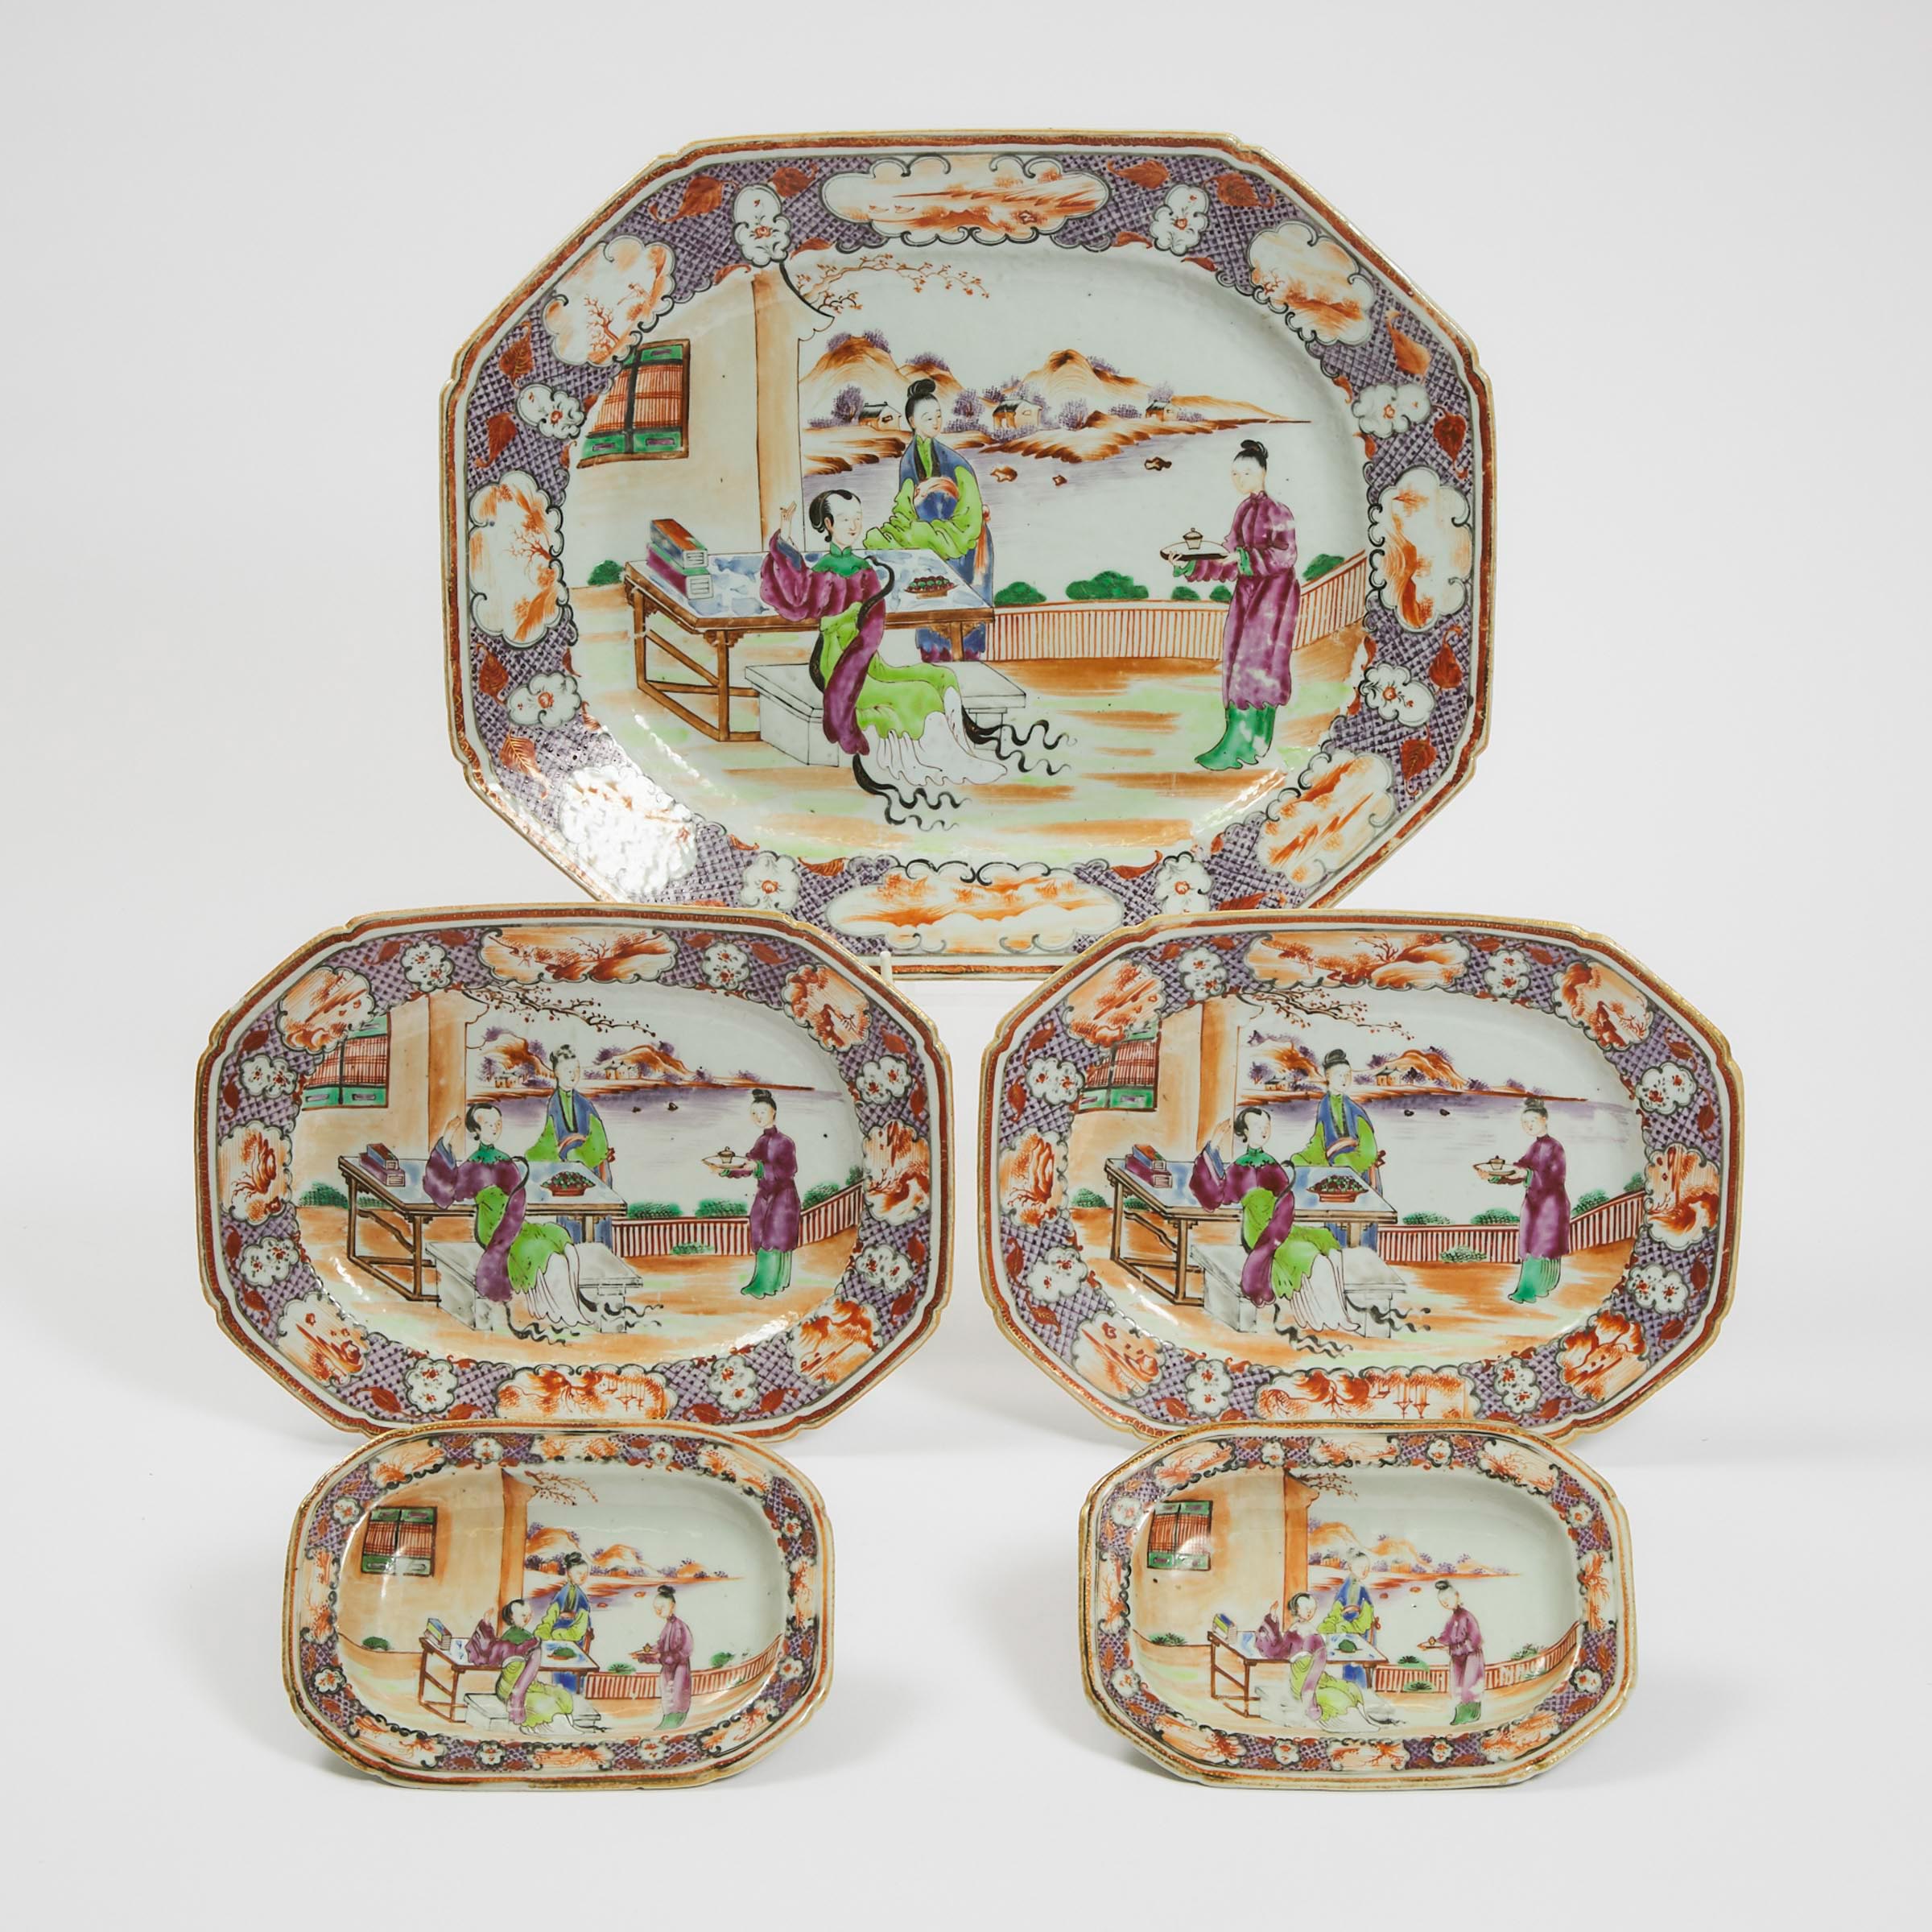 A Set of Six Chinese Export Famille Rose 'Figural' Platters and Tureen, Qianlong Period, Late 18th Century